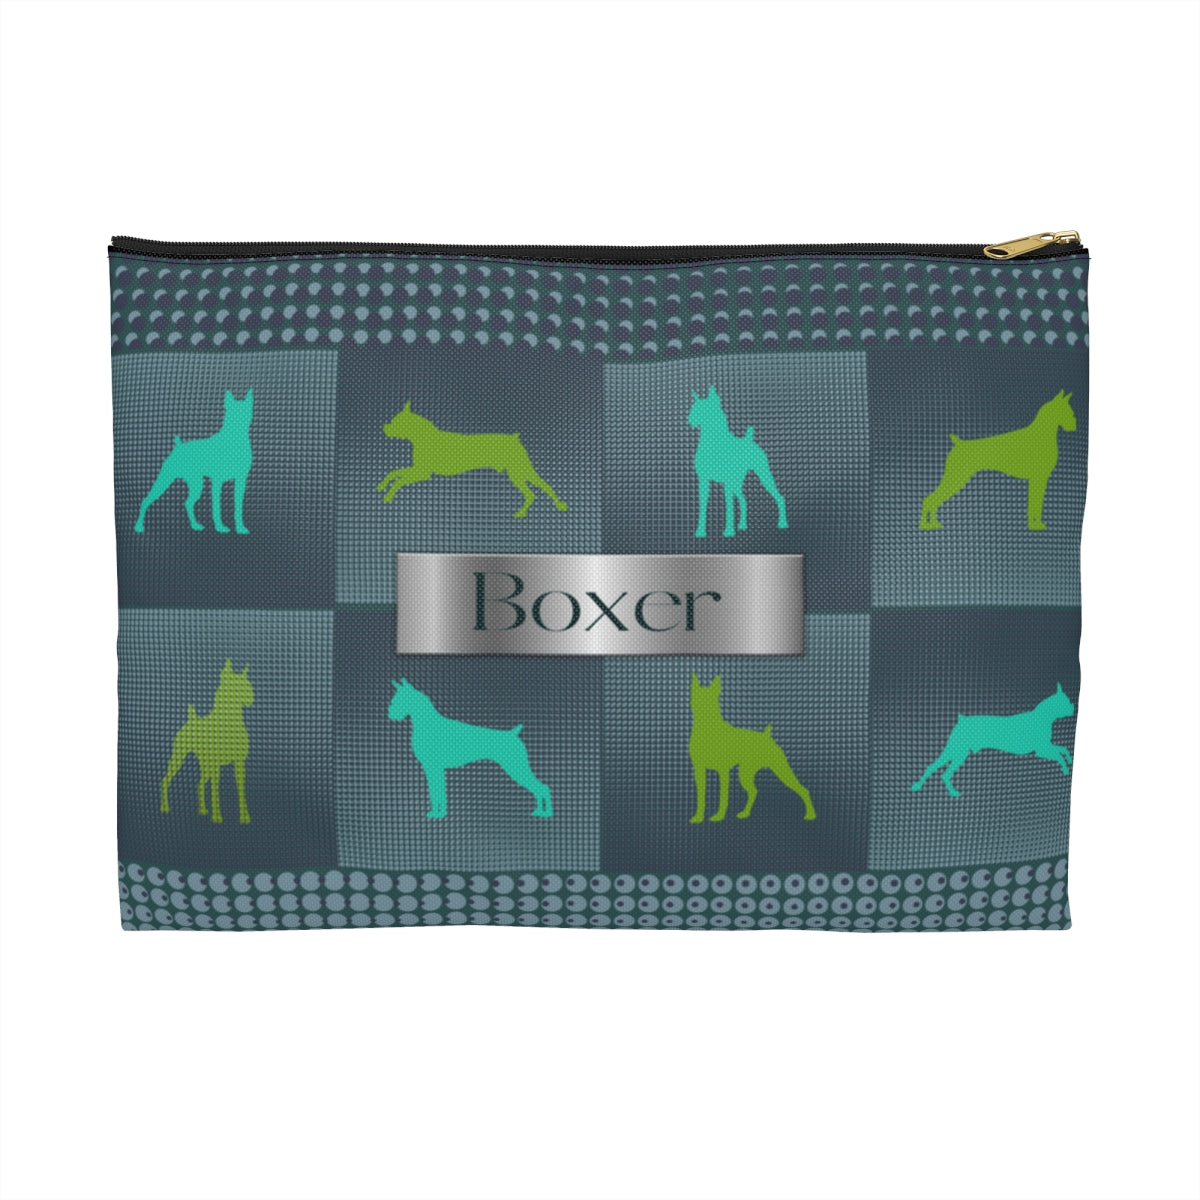 Stylish Boxer Pouch | Travel Accessory Pouch | The Dapper Dogg